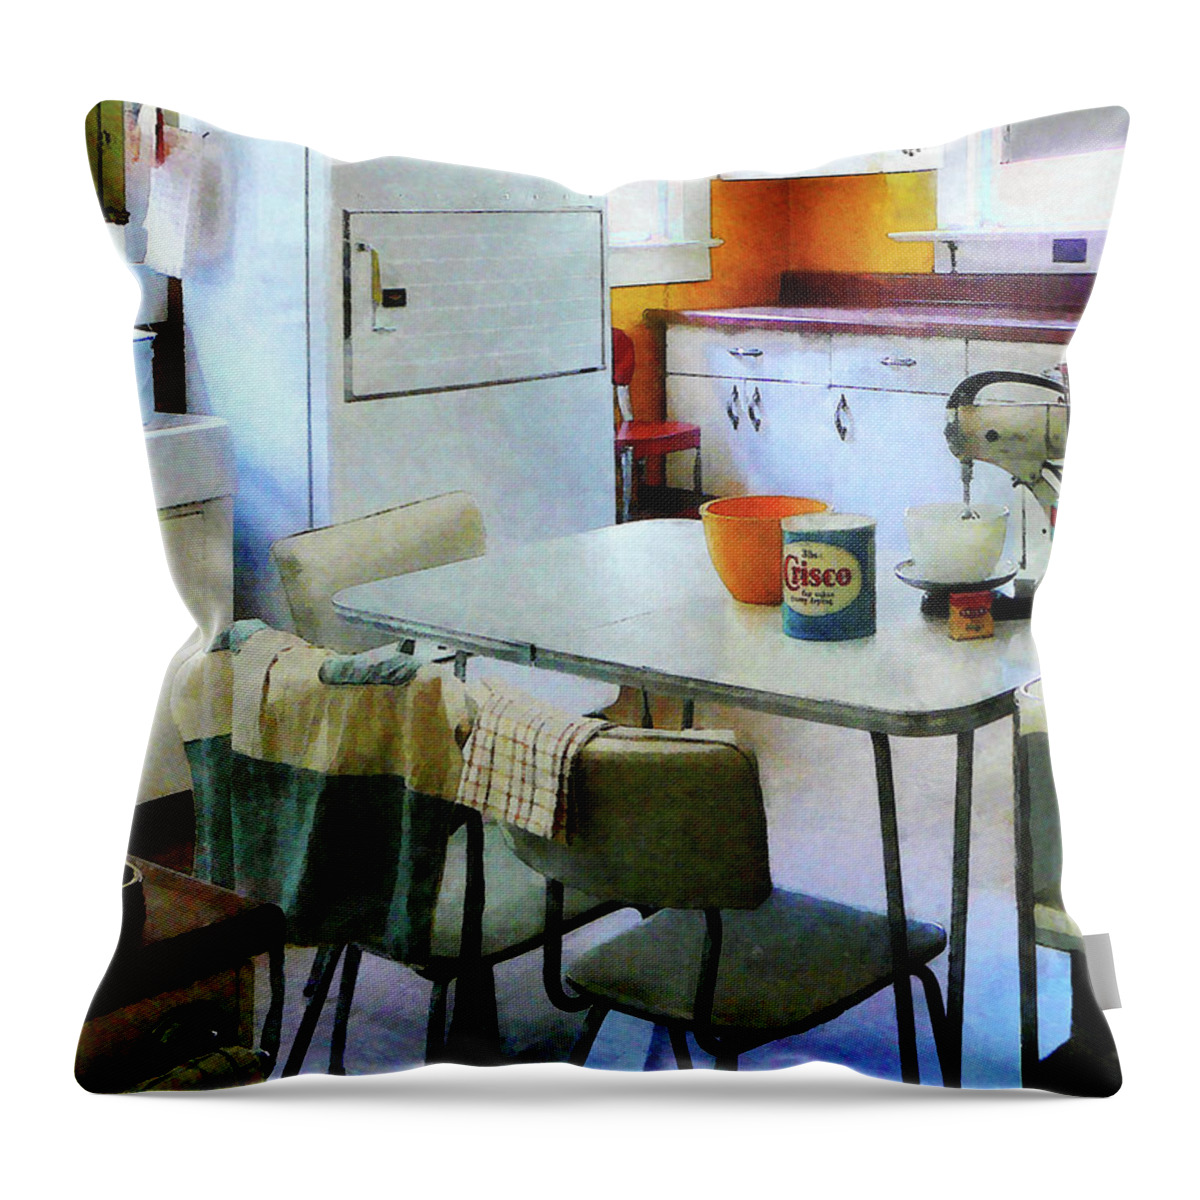 Fifties Kitchen Throw Pillow featuring the photograph Fifties Kitchen by Susan Savad